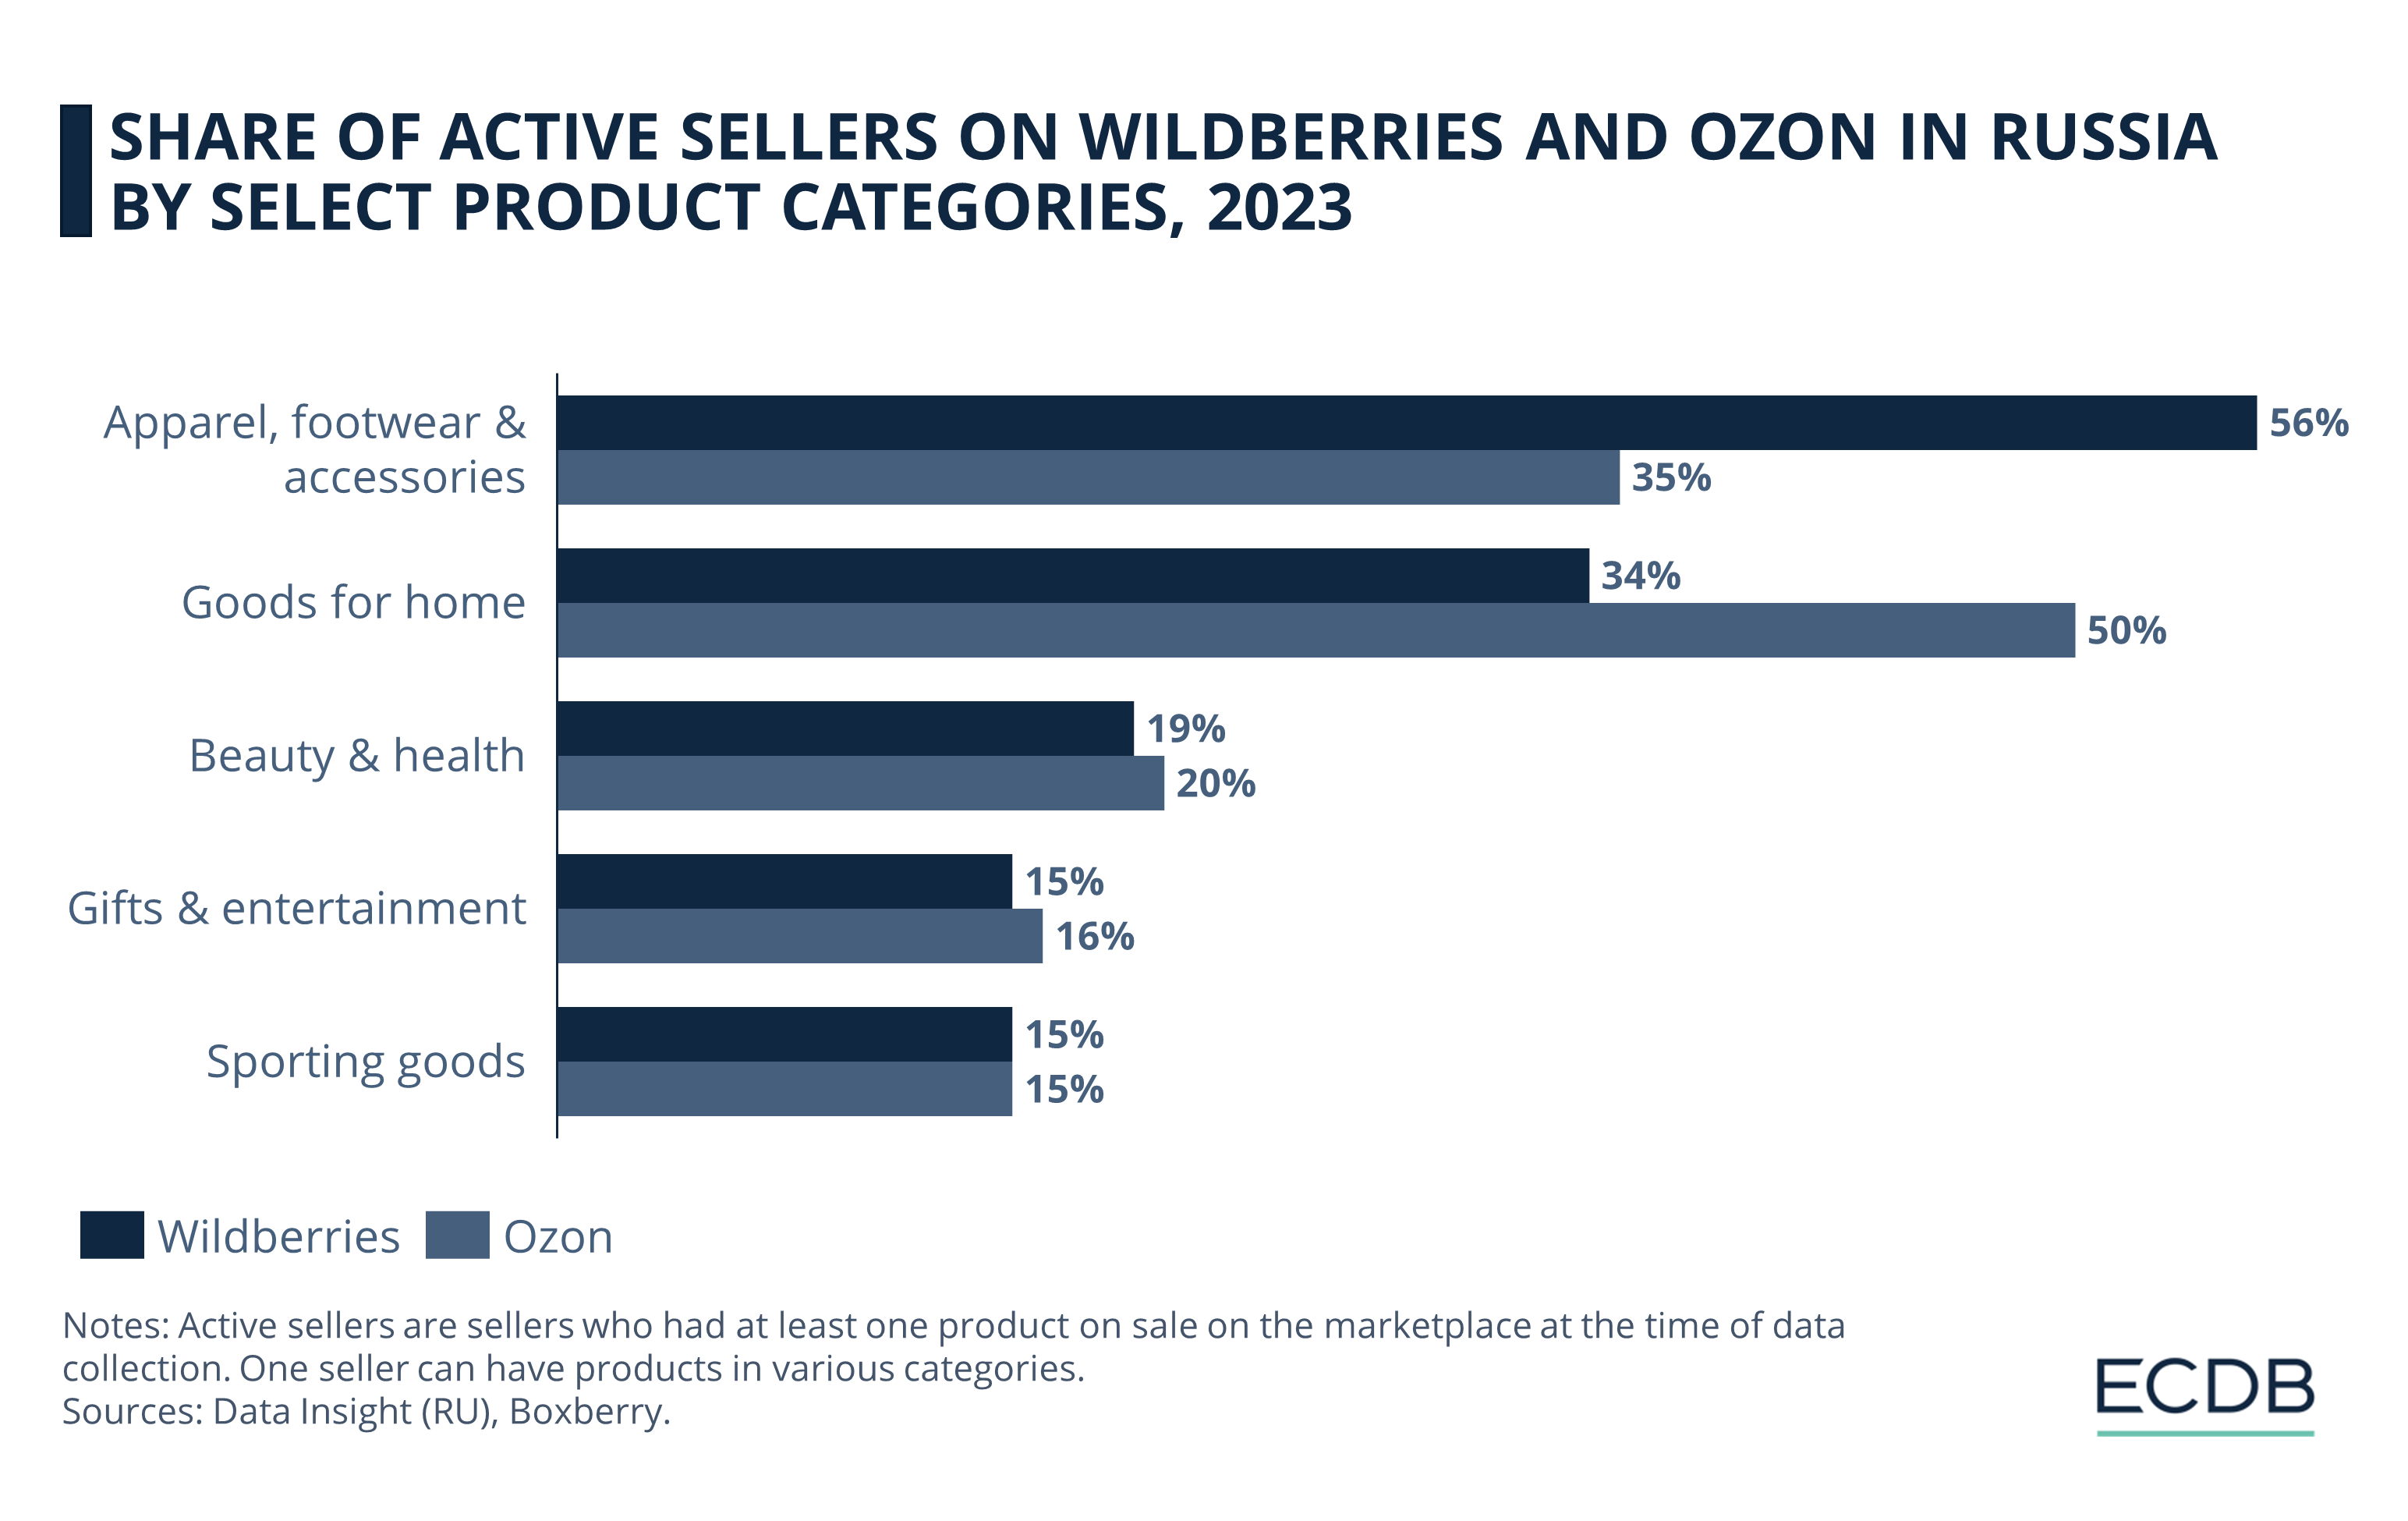 Share of Active Sellers on Wildberries and Ozon in Russia by Select Product Categories, 2023